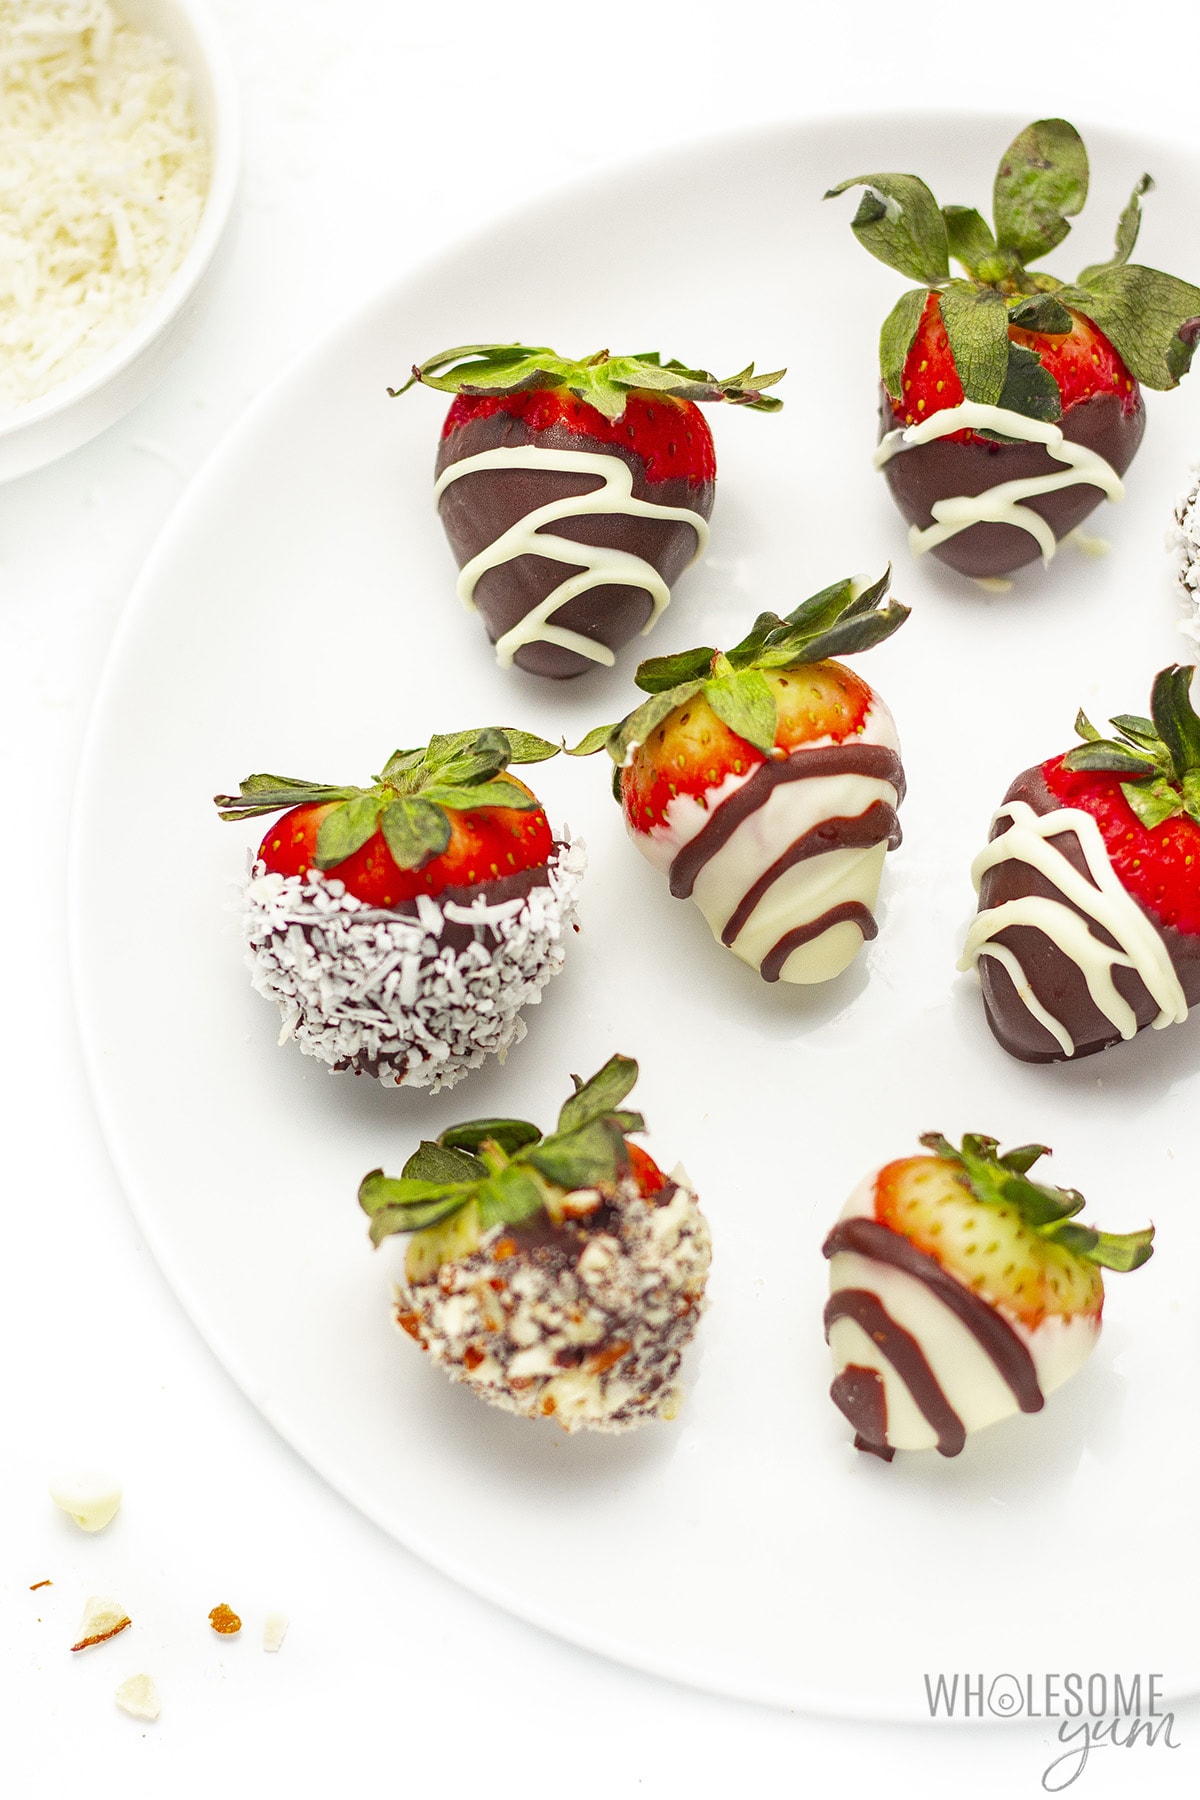 Sugar-free chocolate covered strawberries with nuts and decorations.